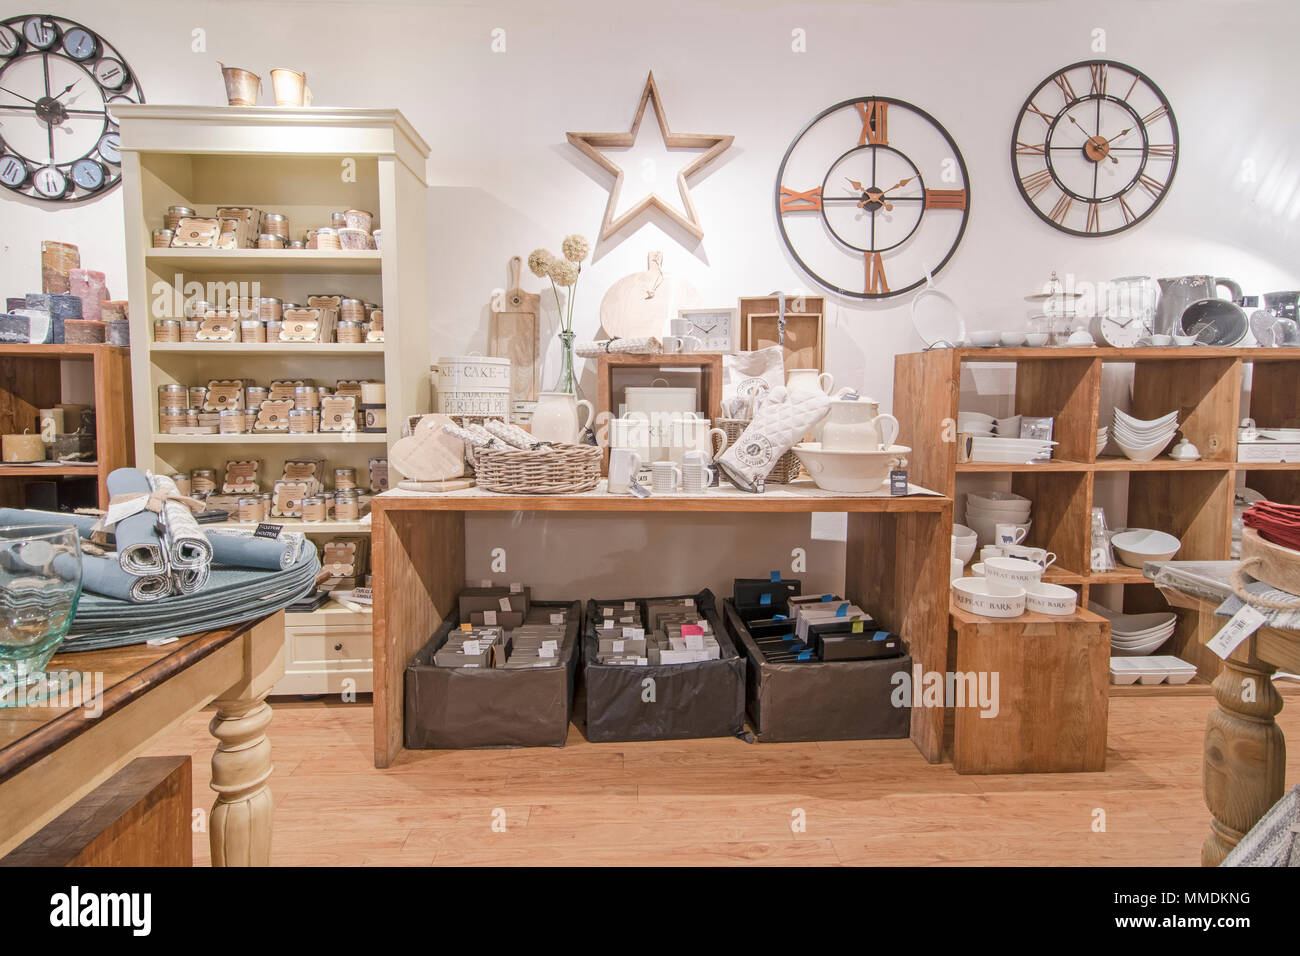 Gift shop full of accessories and home decorations Stock Photo